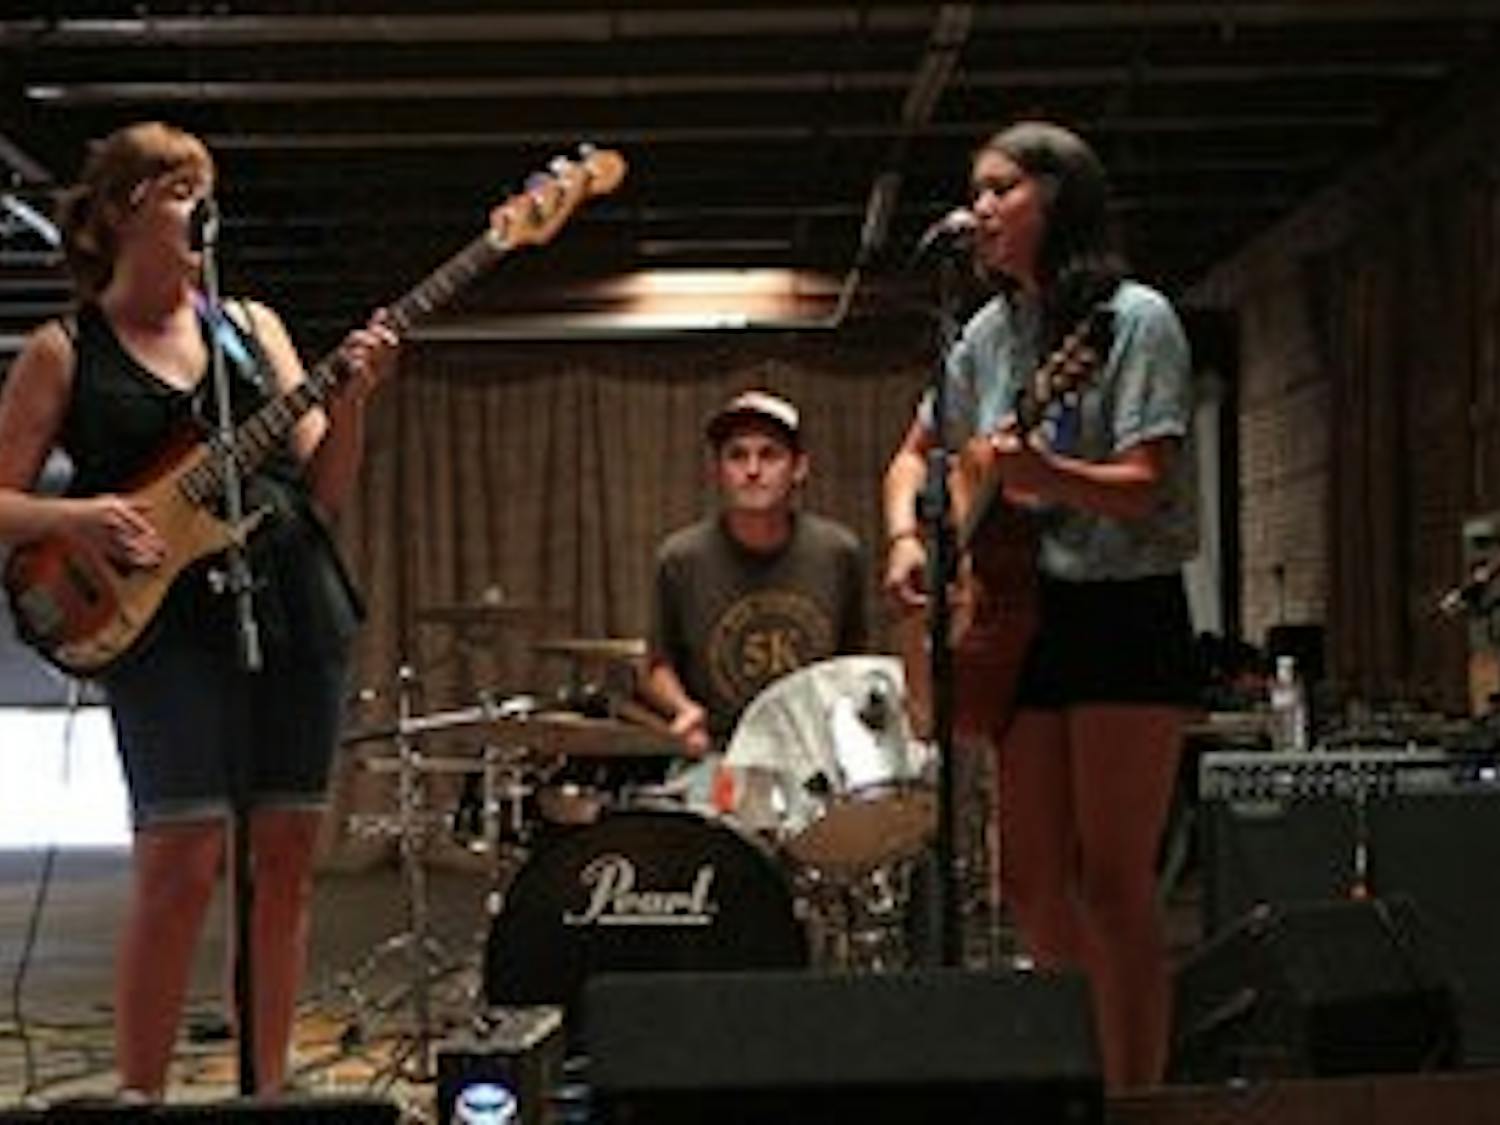 Outskirts (from left: Sierra Farr, Brian McLeod and Lisa Taylor) get set to rock out during the Opelika Shidig Saturday evening. The party was to celebrate local artists, vendors and musical talent at The Railyard, a gallery and exhibition space in downtown Opelika. (Rebecca Croomes / PHOTO EDITOR)